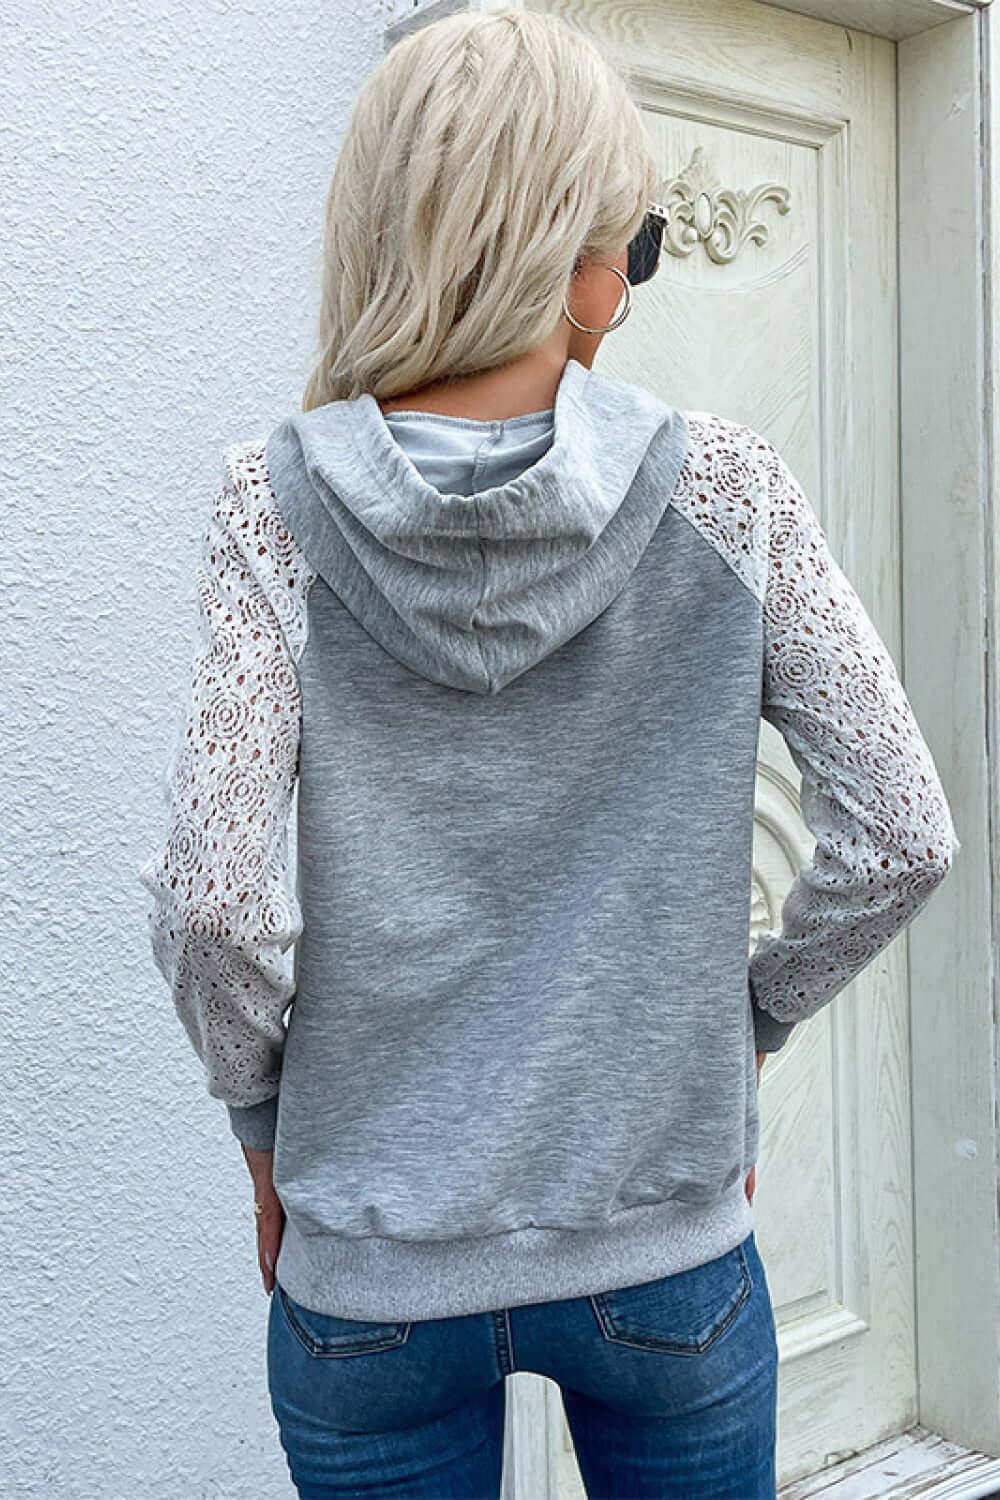 Women's Gray Hoodie with Lace Raglan Sleeve Drawstring -Women’s hooded sweaters#Firefly Lane Boutique1